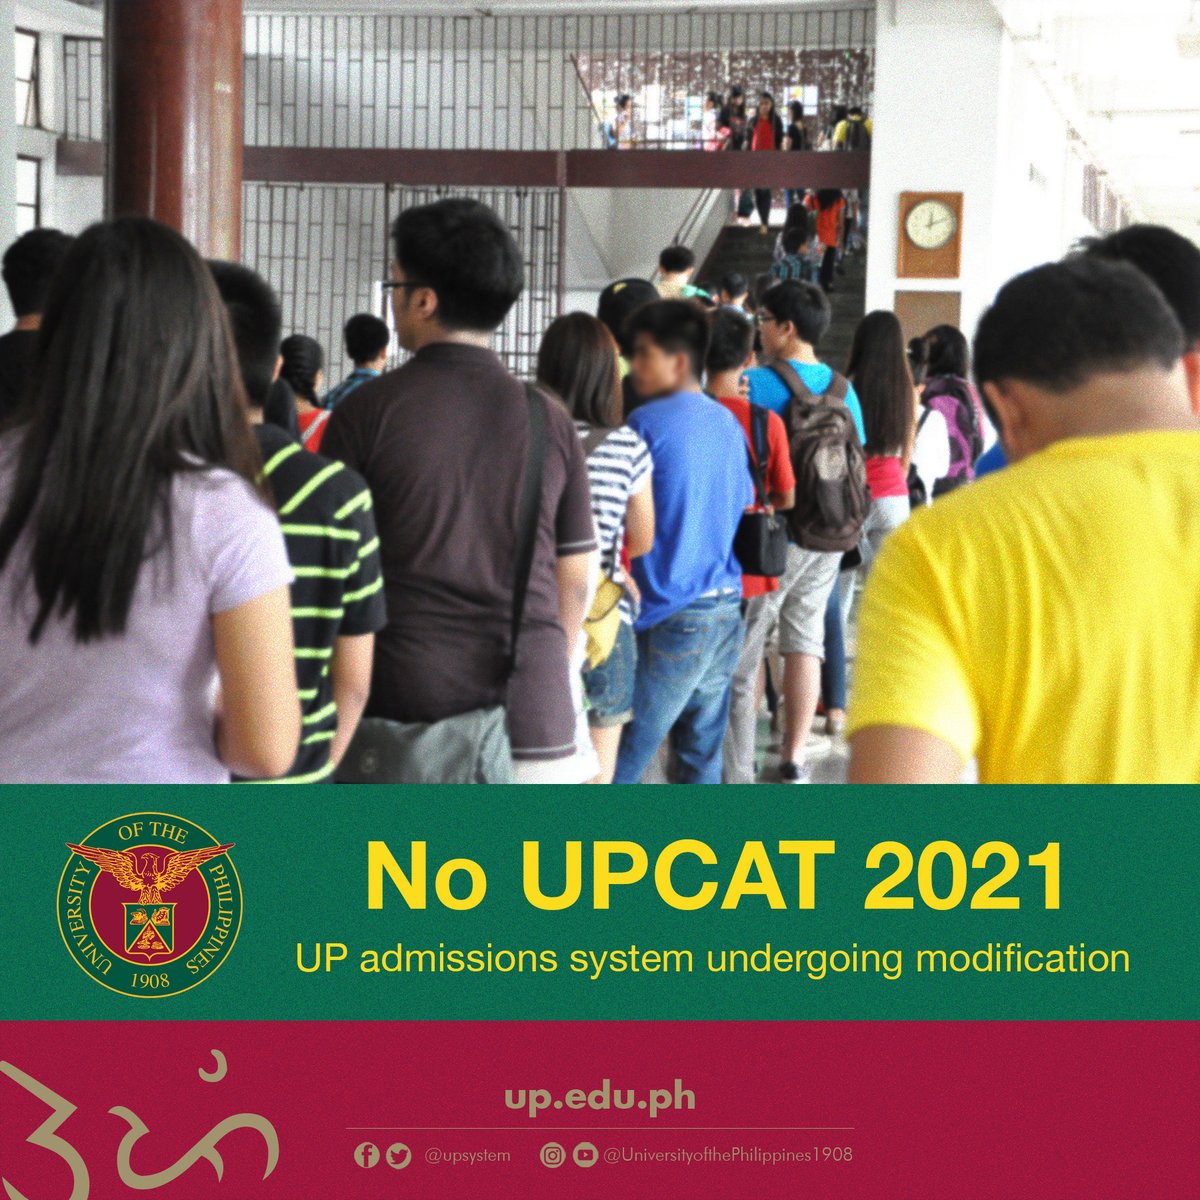 Due to COVID-19, University Councils across the UP System unanimously decided not to hold the UPCAT for admission of students in AY 2021-22. Instead, the UP Office of Admissions is currently modifying the admissions system for the next intake year.

Read: up.edu.ph/no-upcat-2021-…